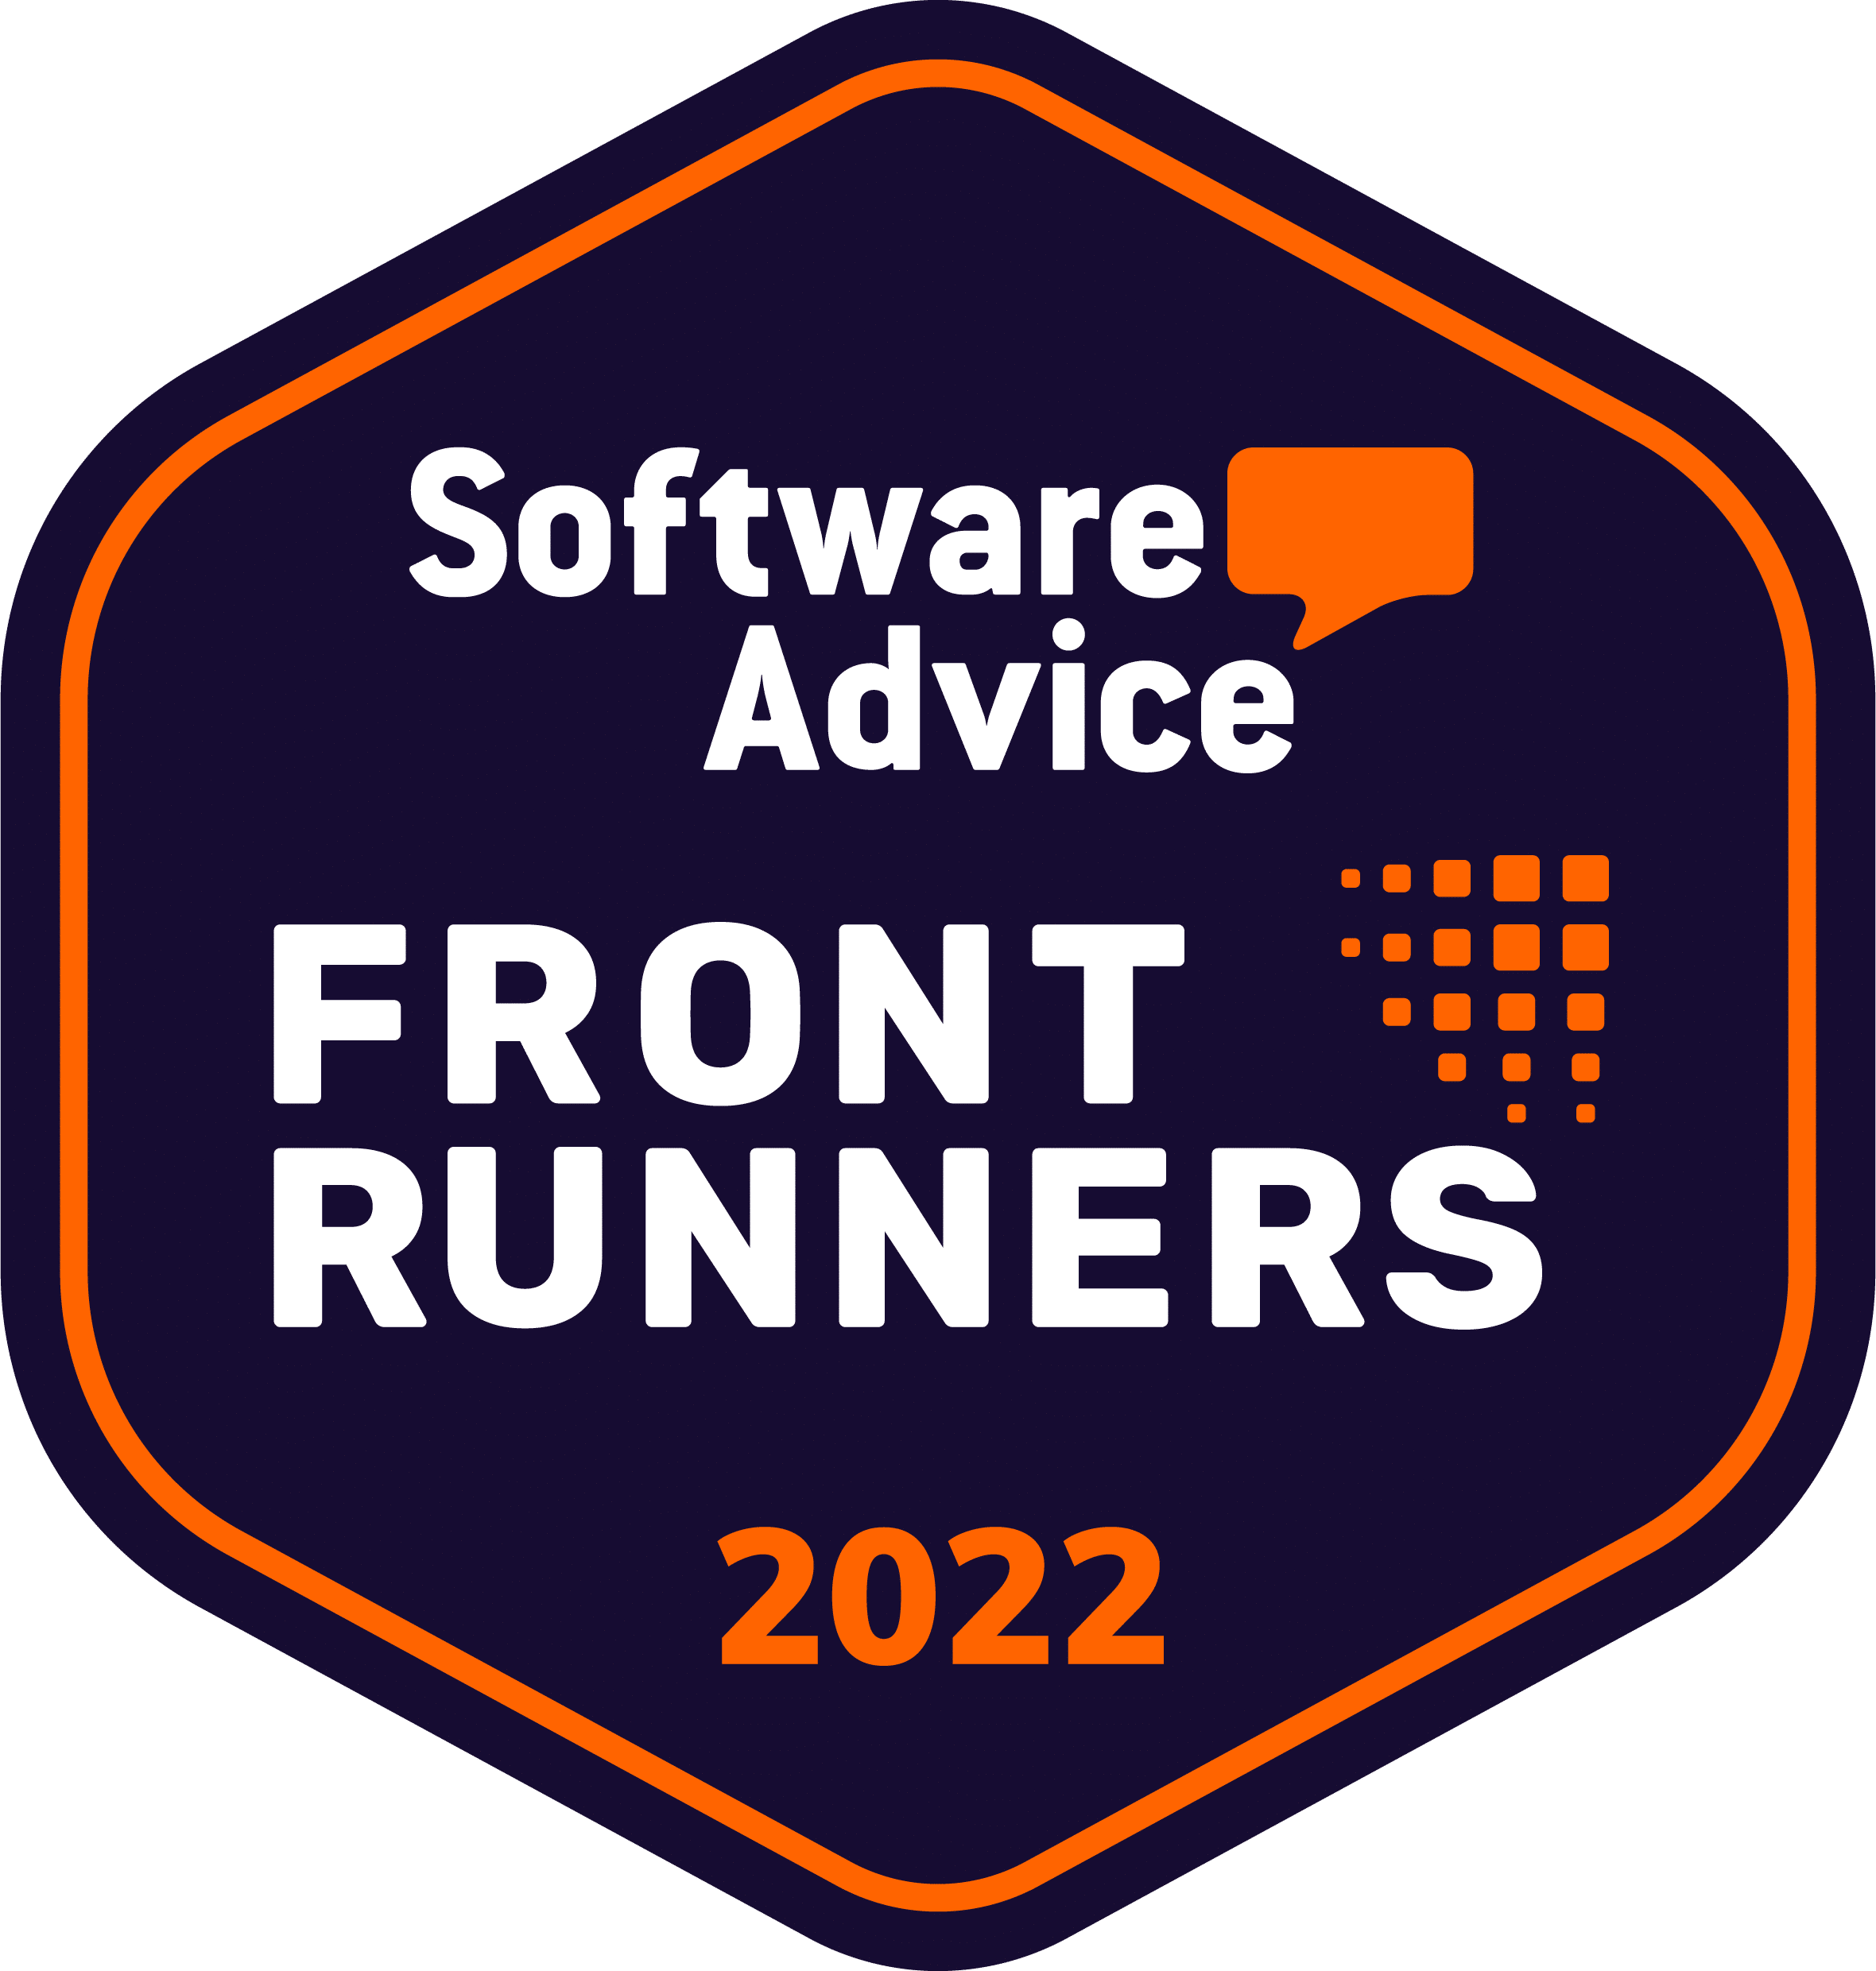 Software Advice Badge Front Runners for 2022